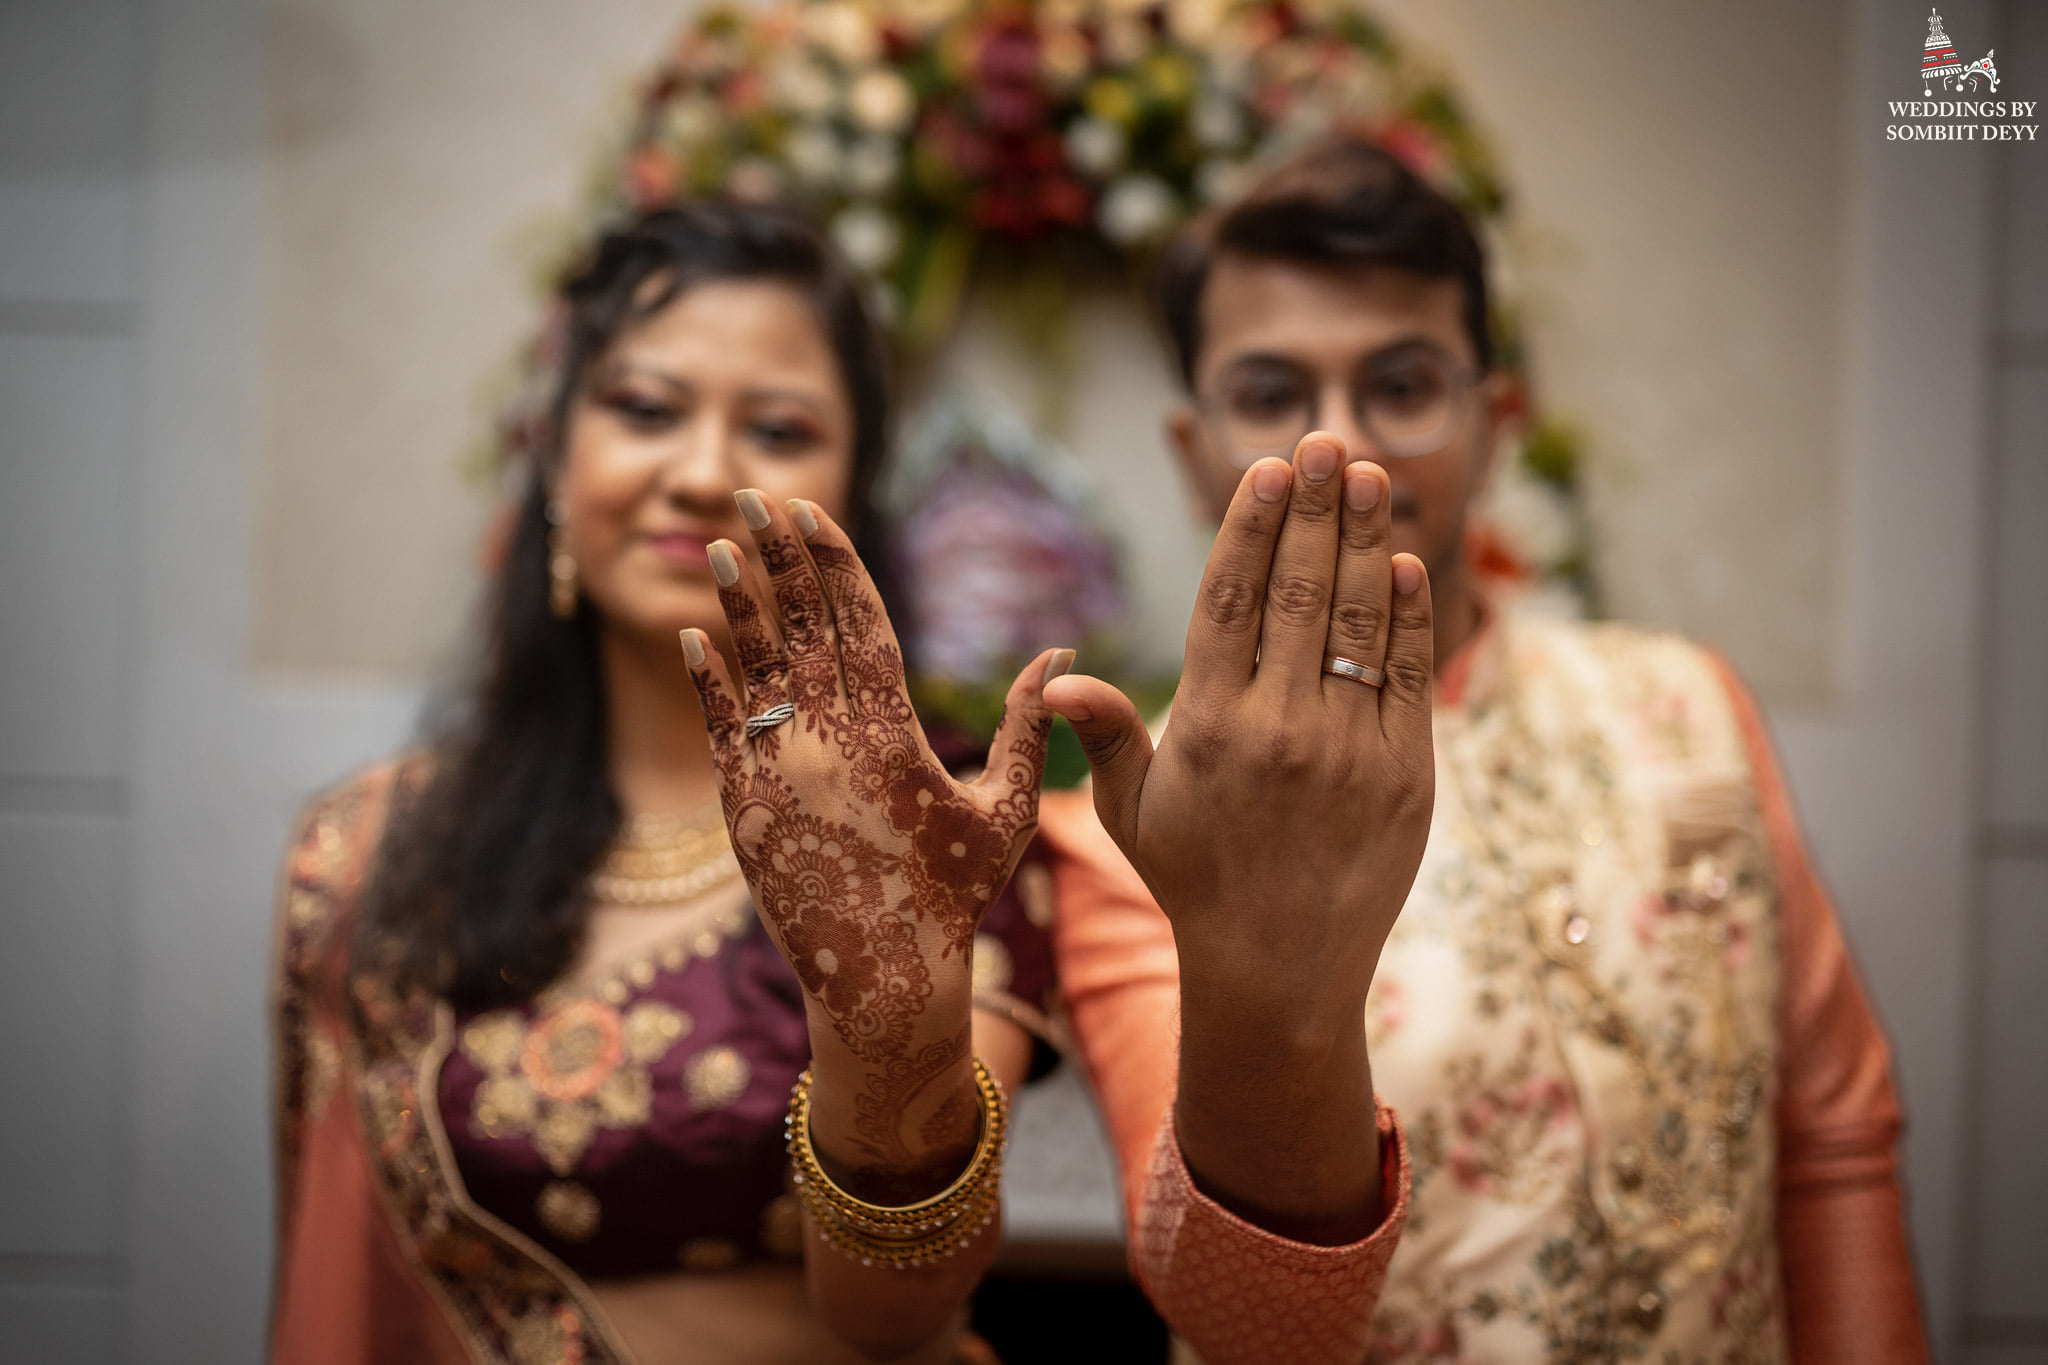 Indian Engagement Photography Ring Ceremony Pose Stock Photo 2056541720   Shutterstock